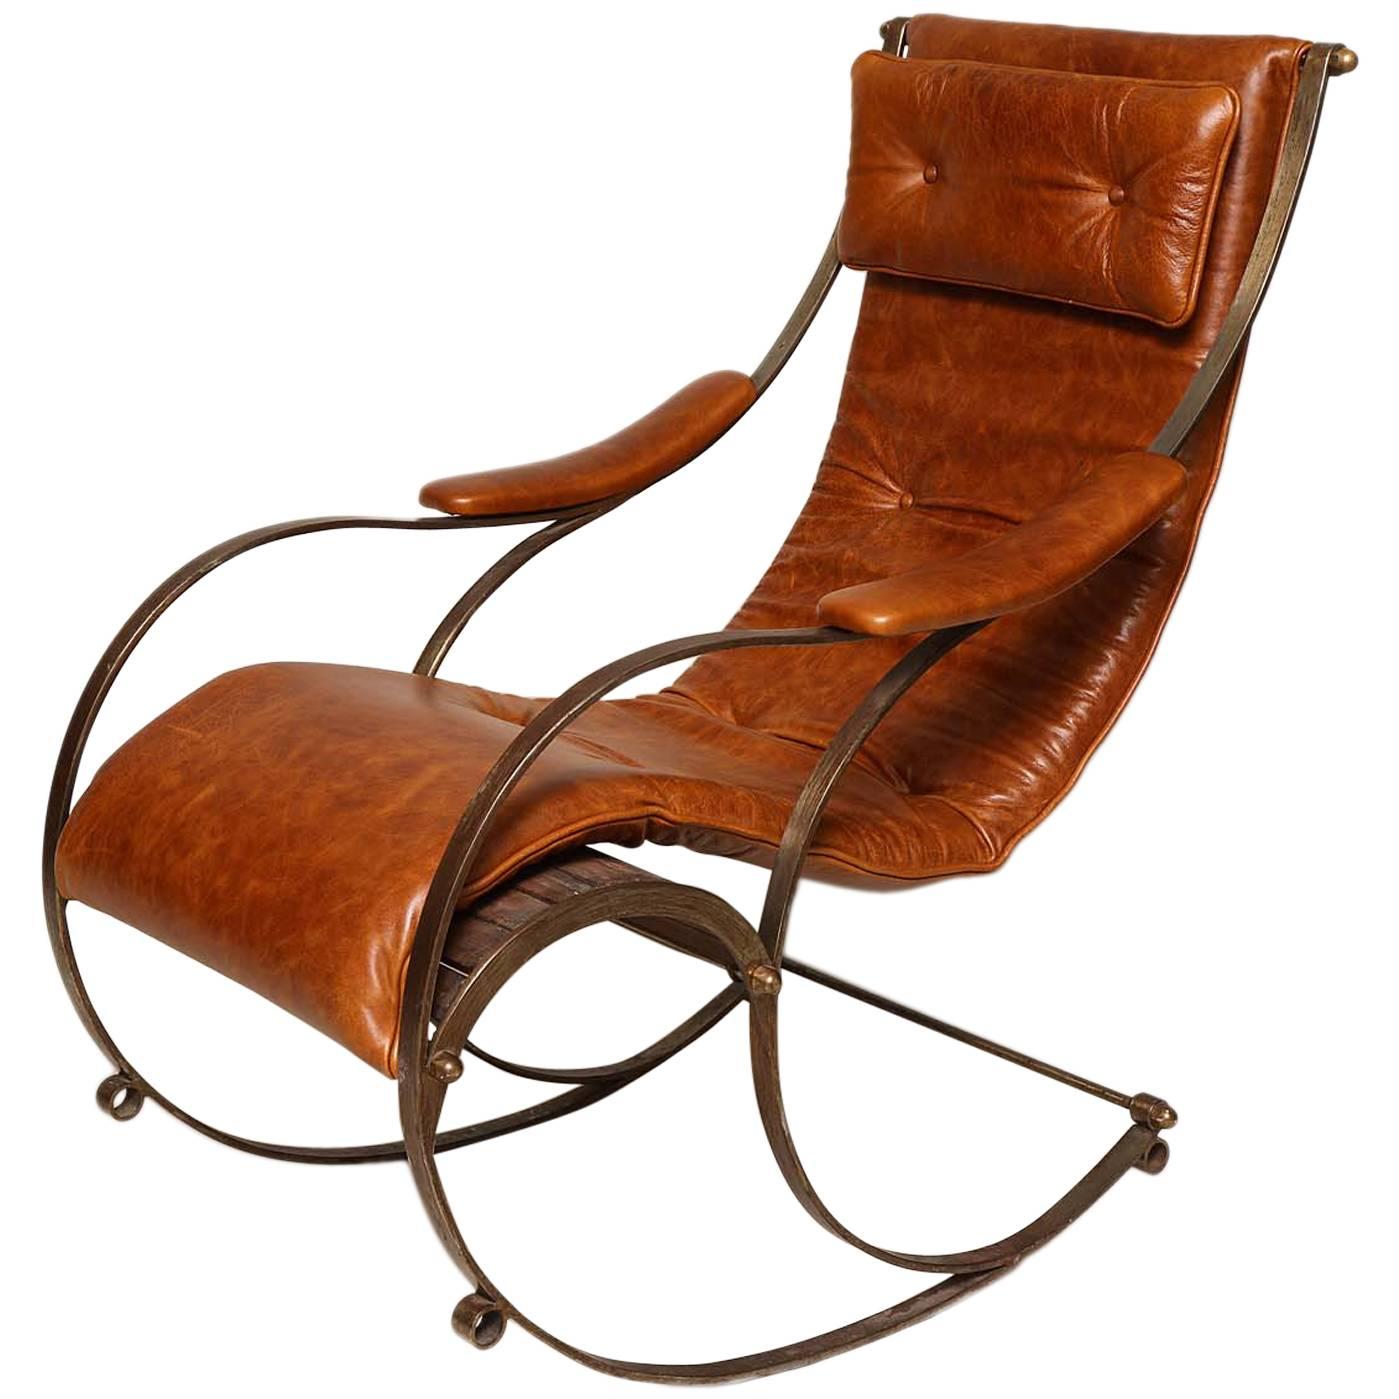 19th Century Steel and Leather Rocking Chair by R. W. Winfield